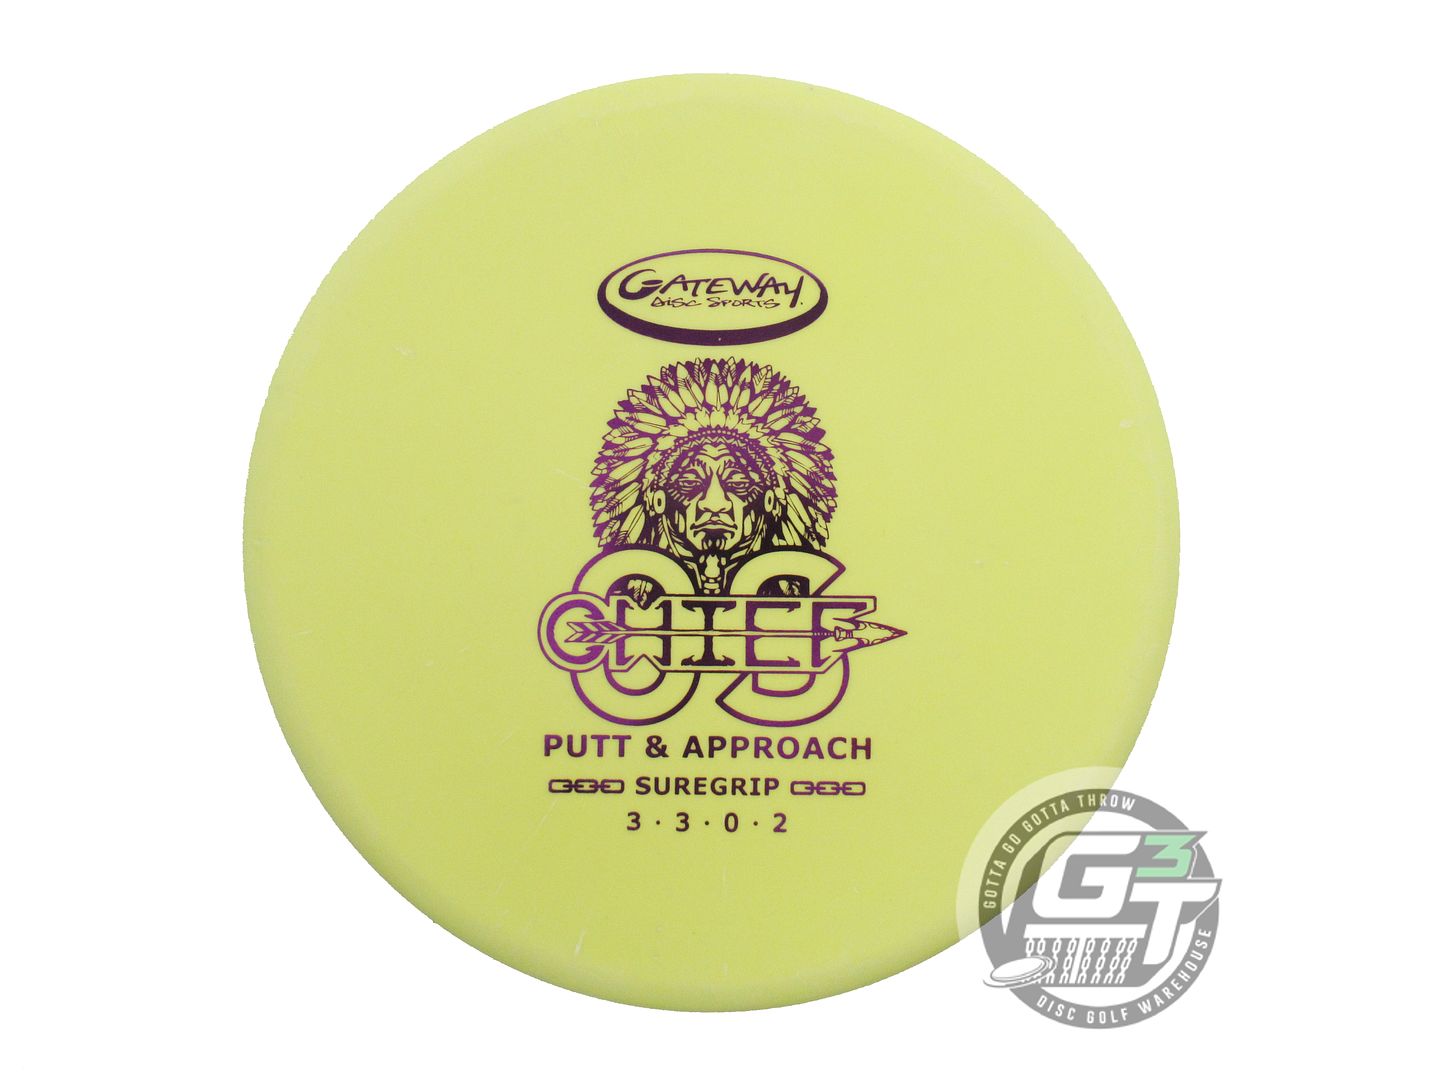 Gateway Sure Grip Soft Chief OS Putter Golf Disc (Individually Listed)